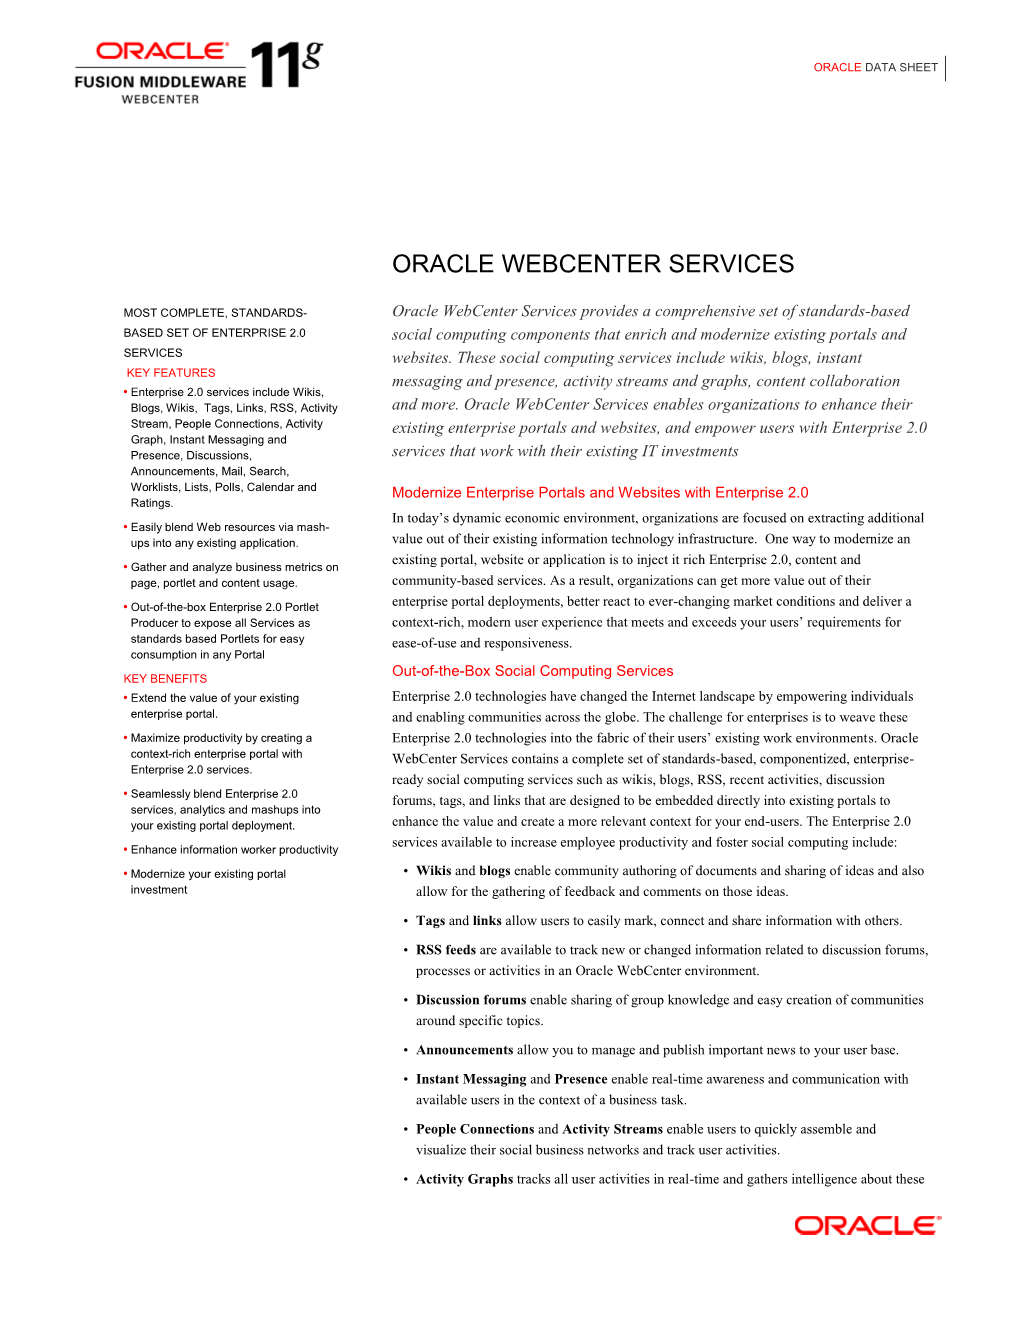 Oracle Webcenter Services